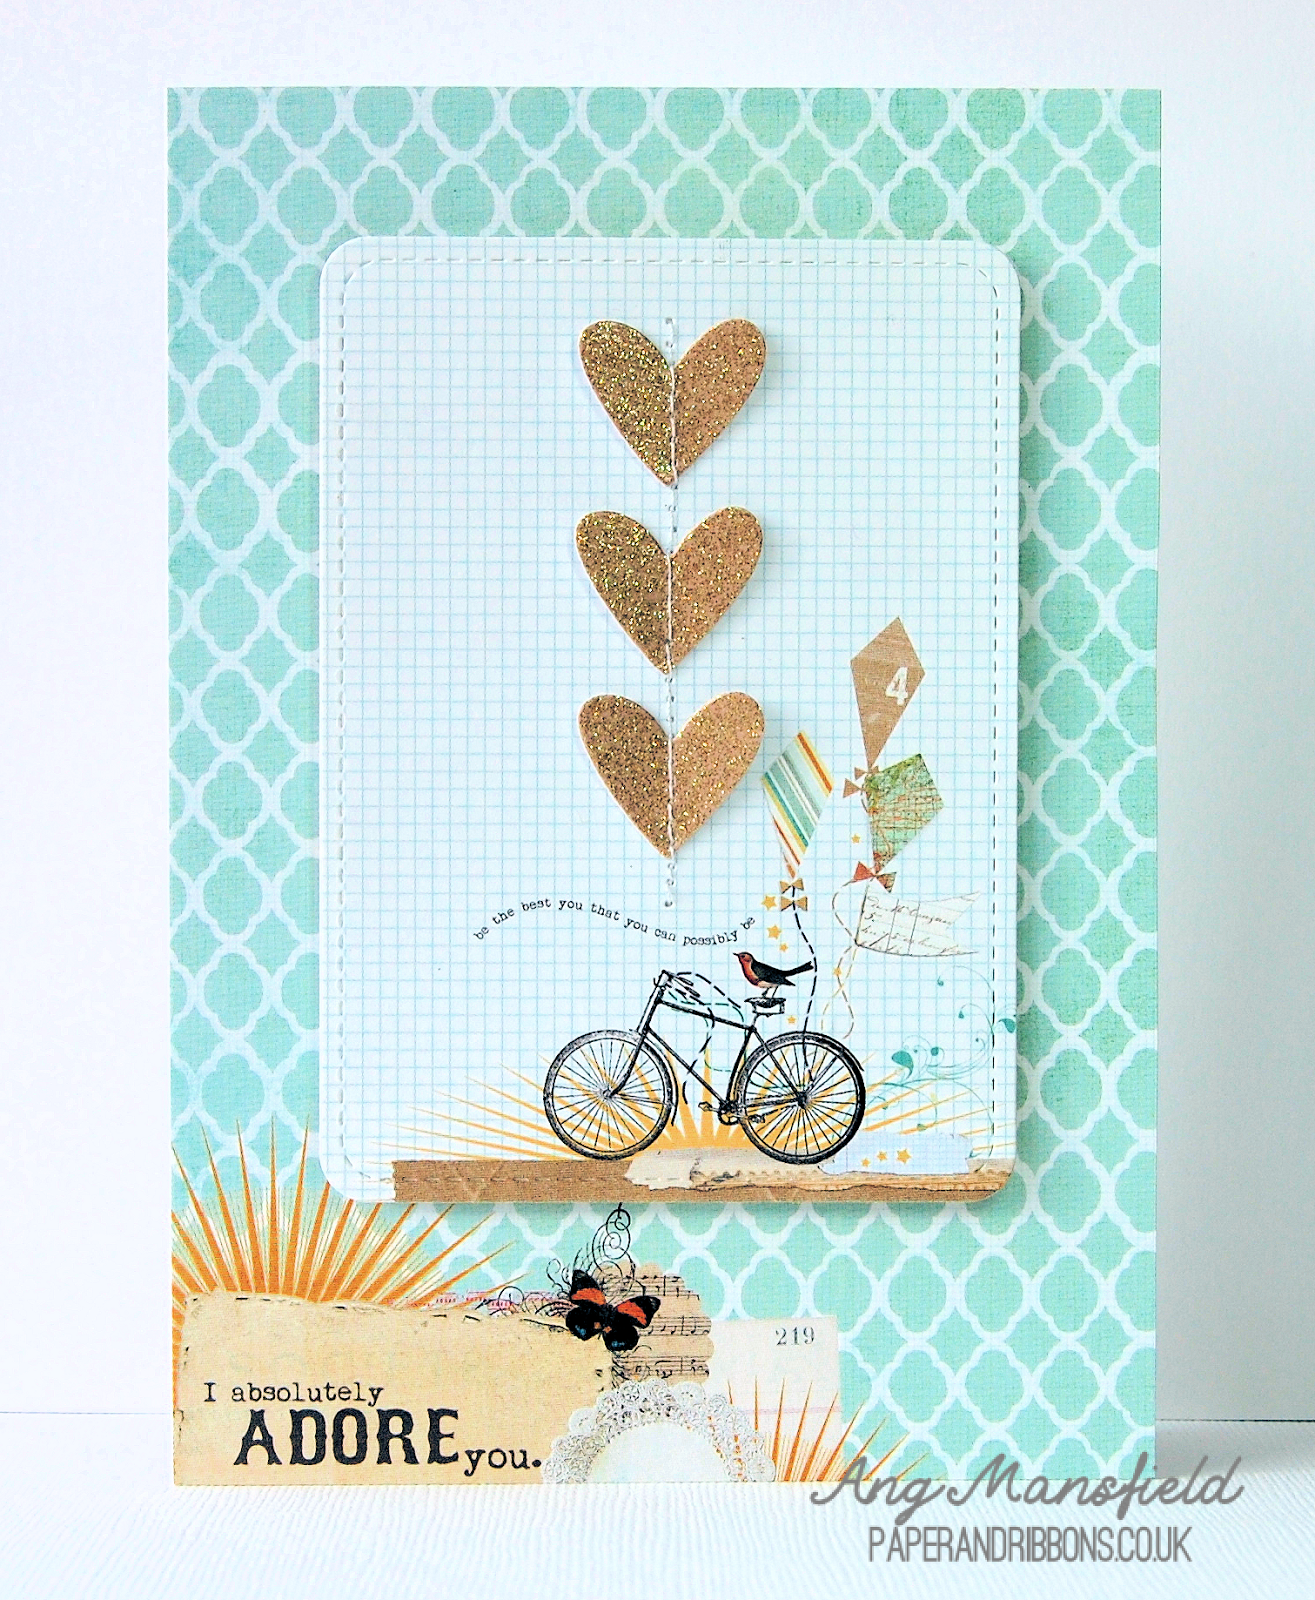 7 more cards for Valentine's Day by Ang Mansfield of Paper and Ribbons